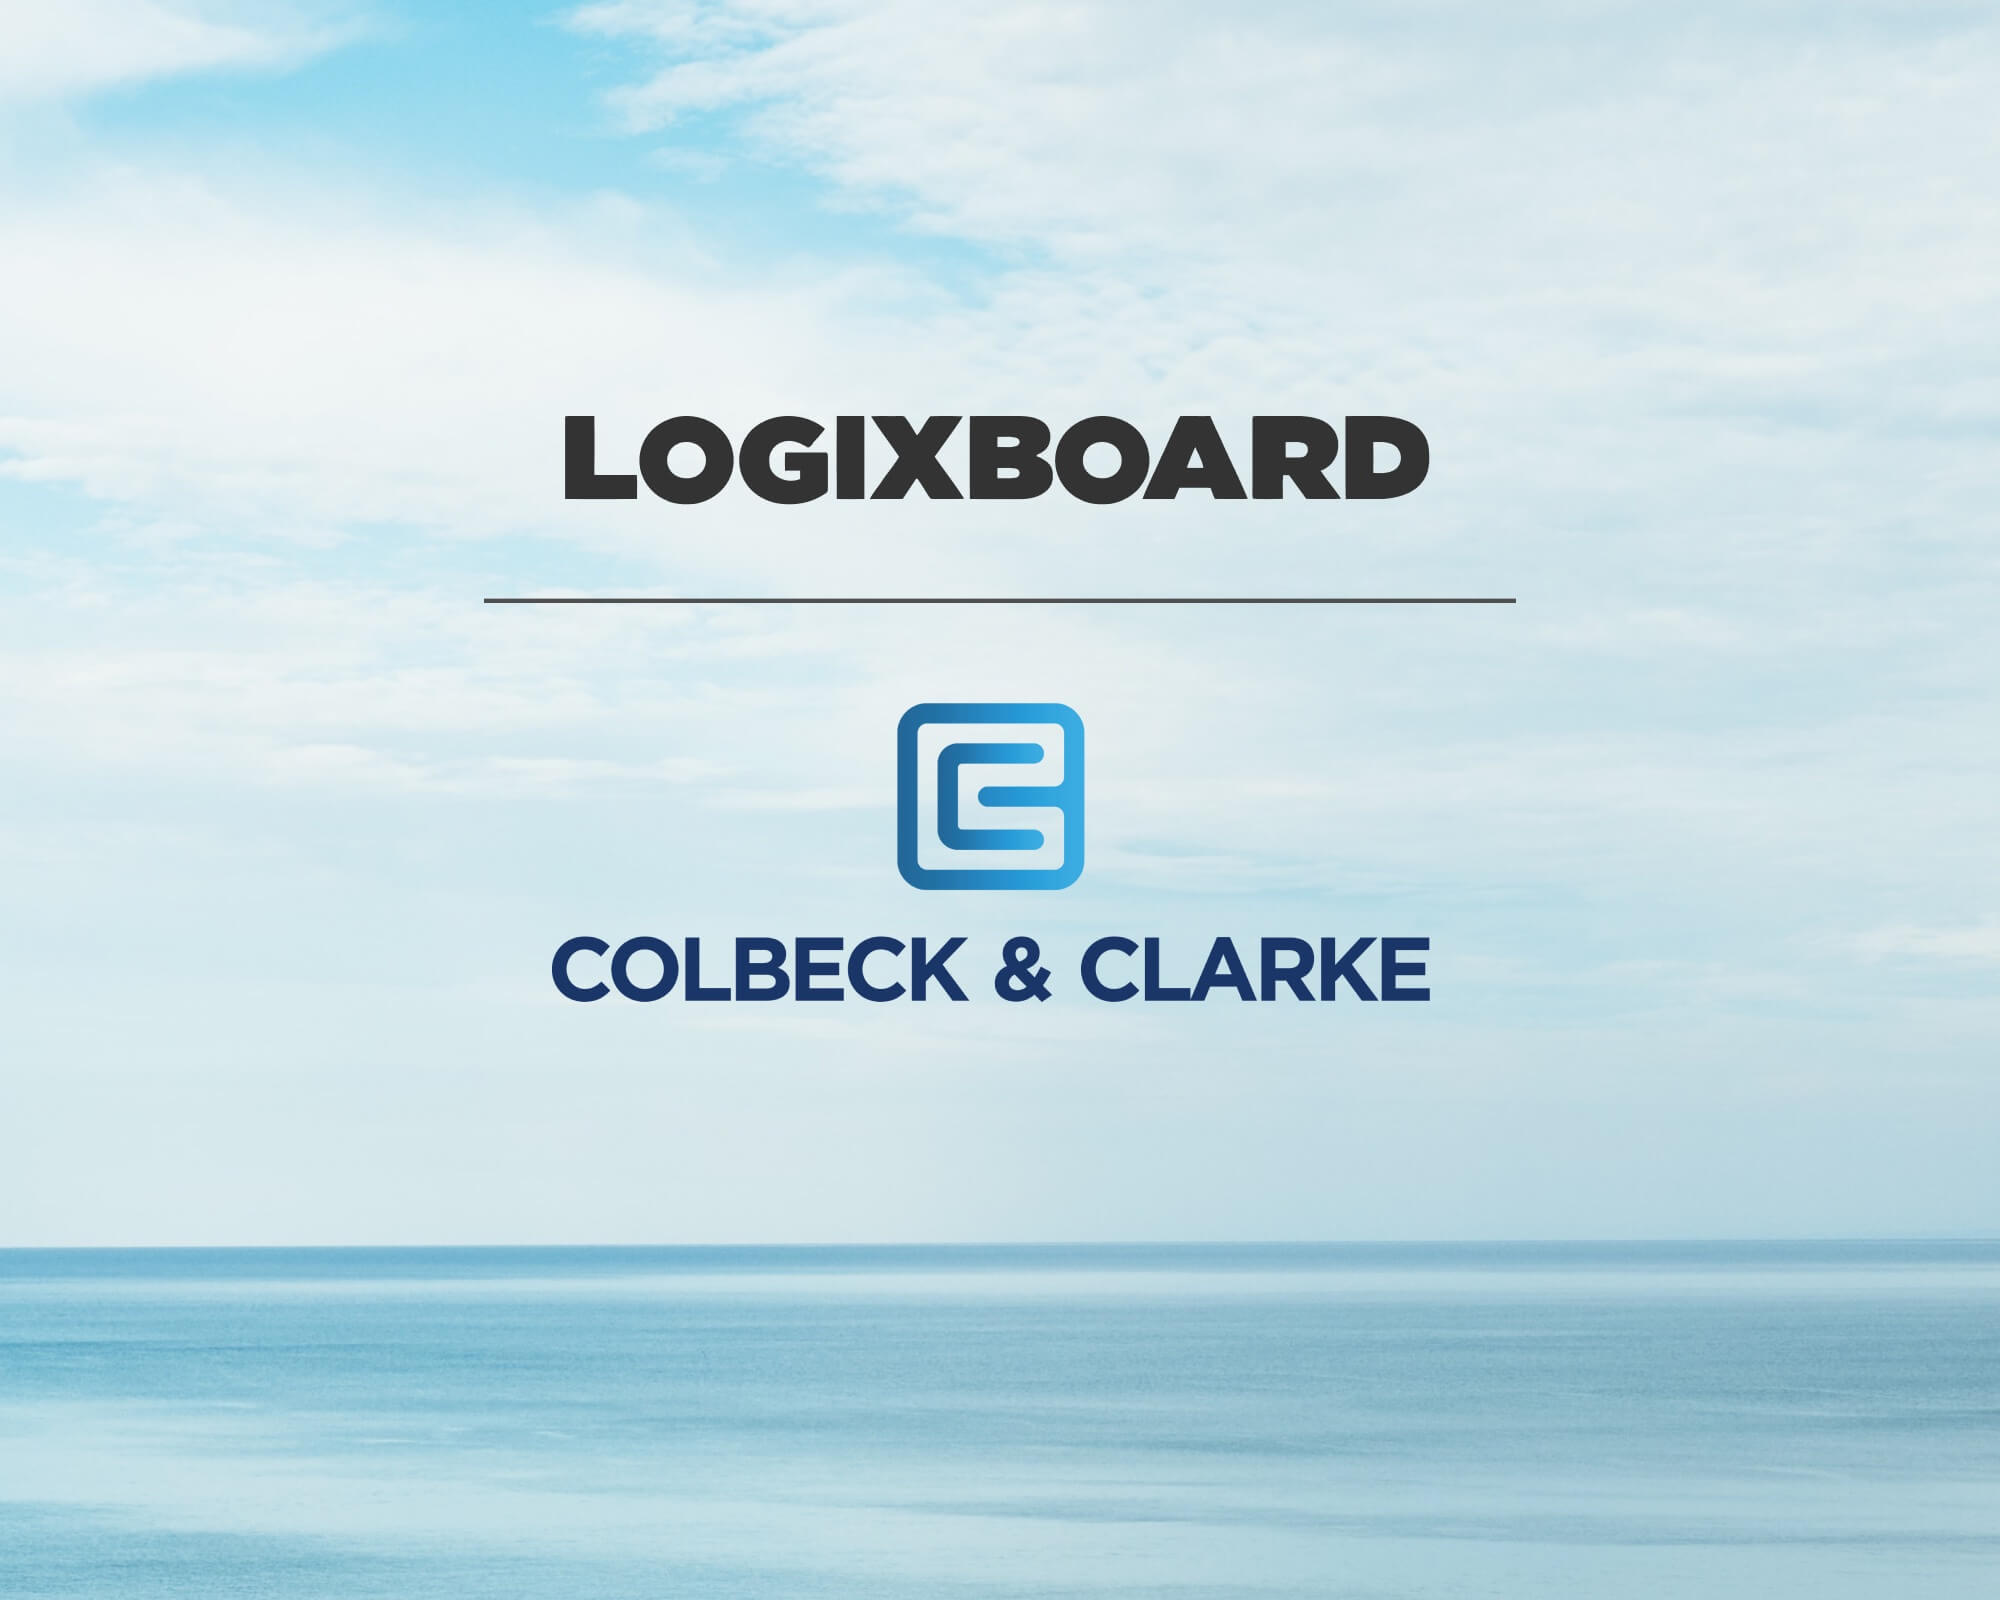 Colbeck & Clarke (Canada) partners with Logixboard to increase competitive edge